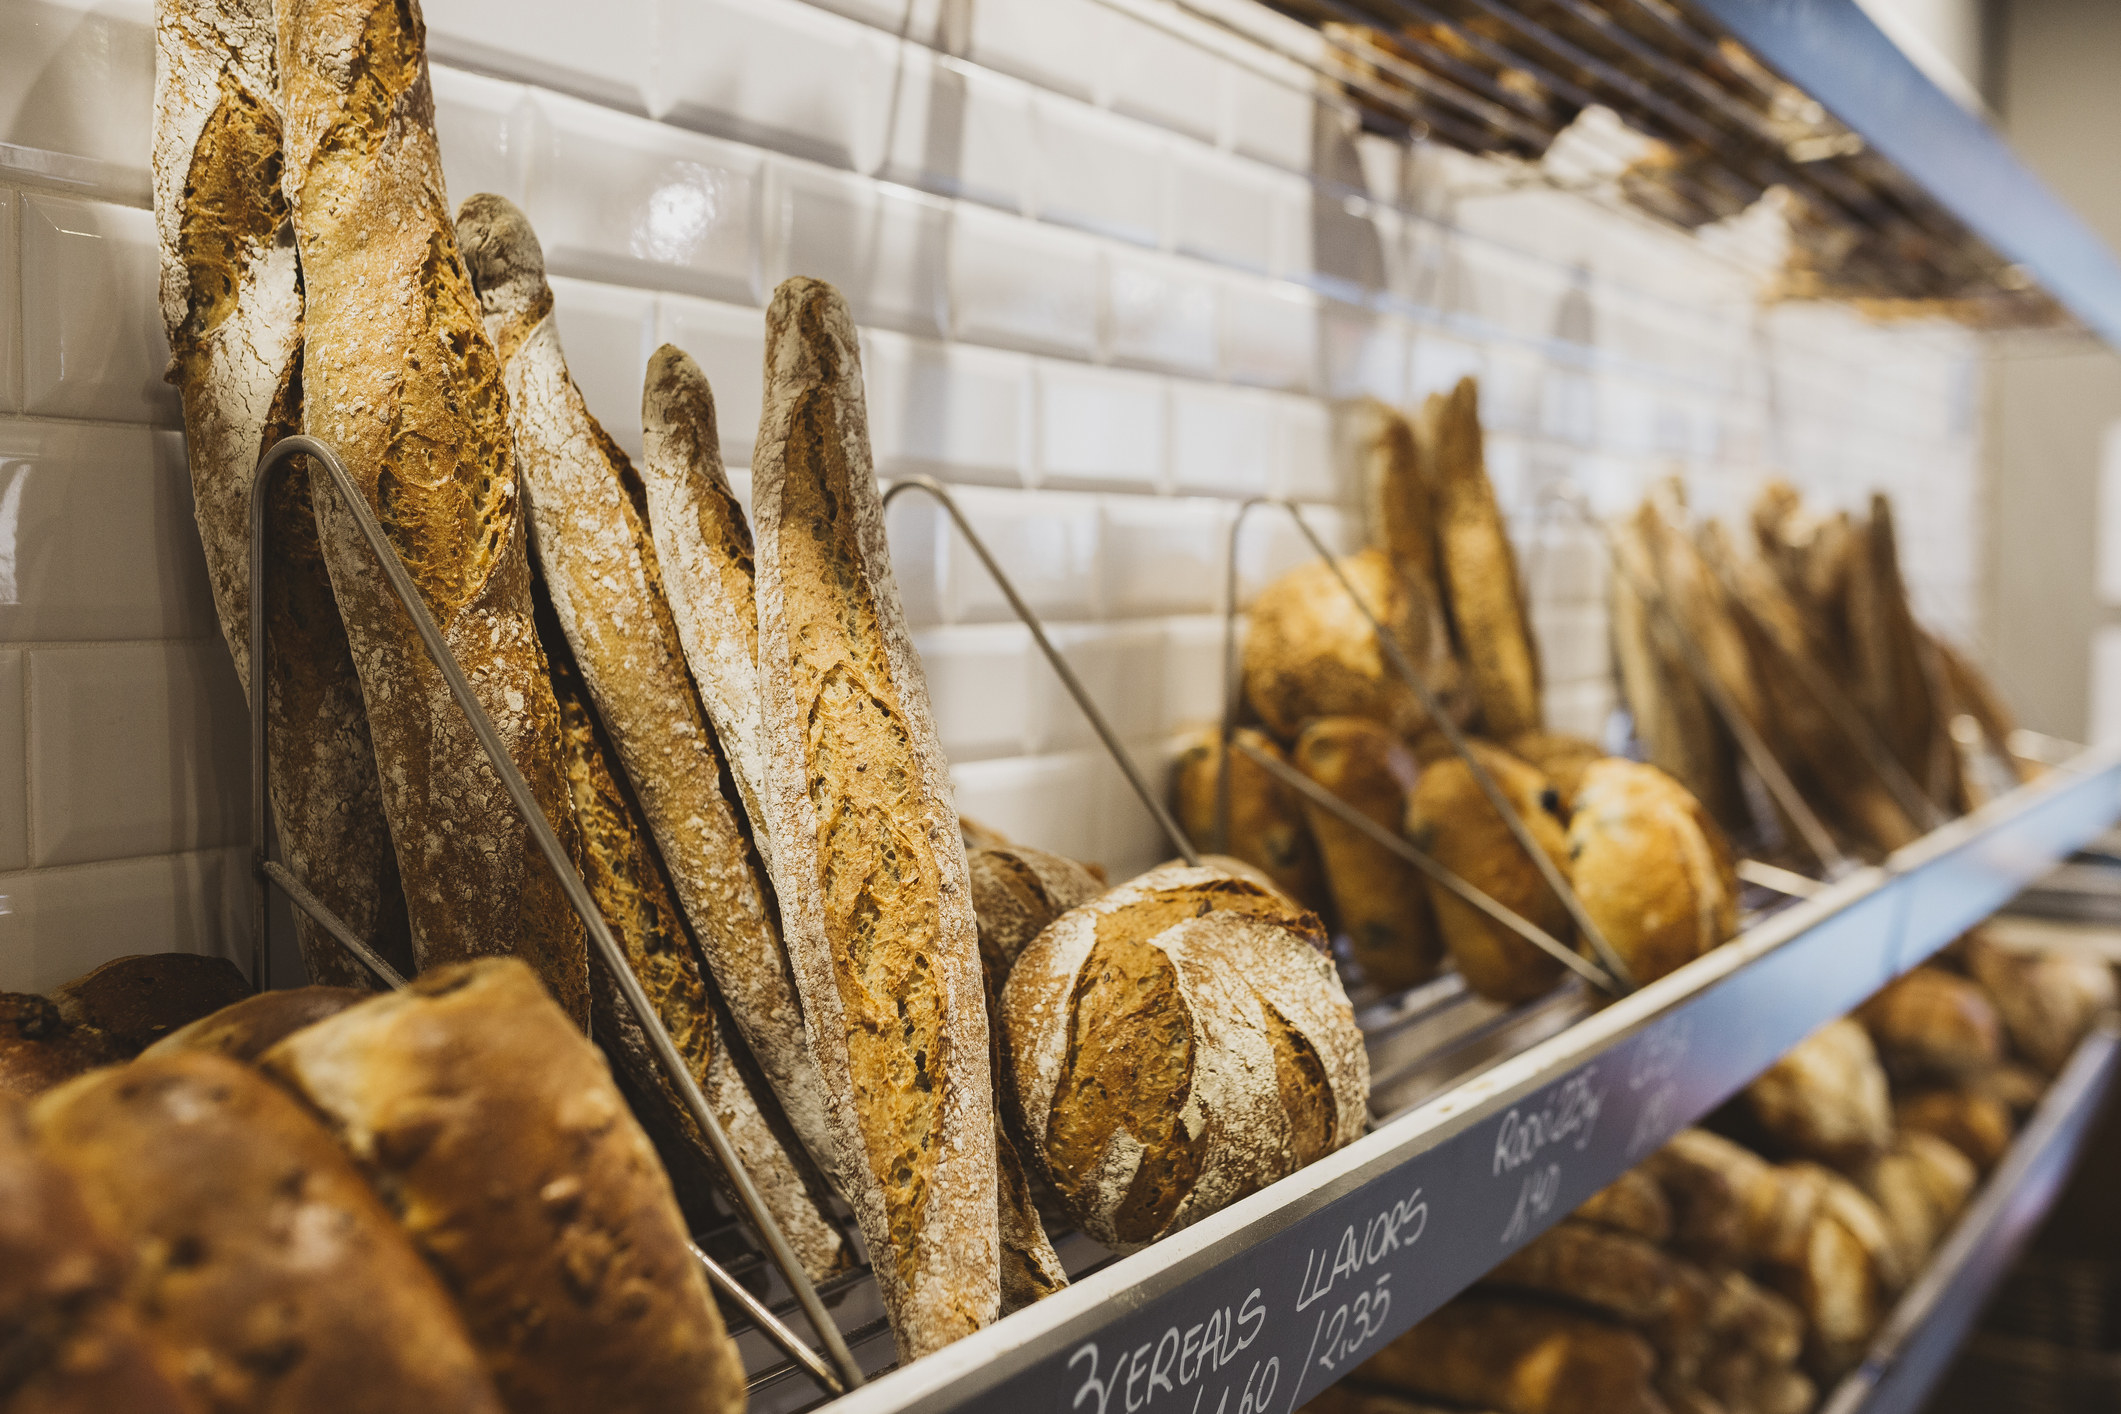 Shelf with rustic bread baguettes at bakery.